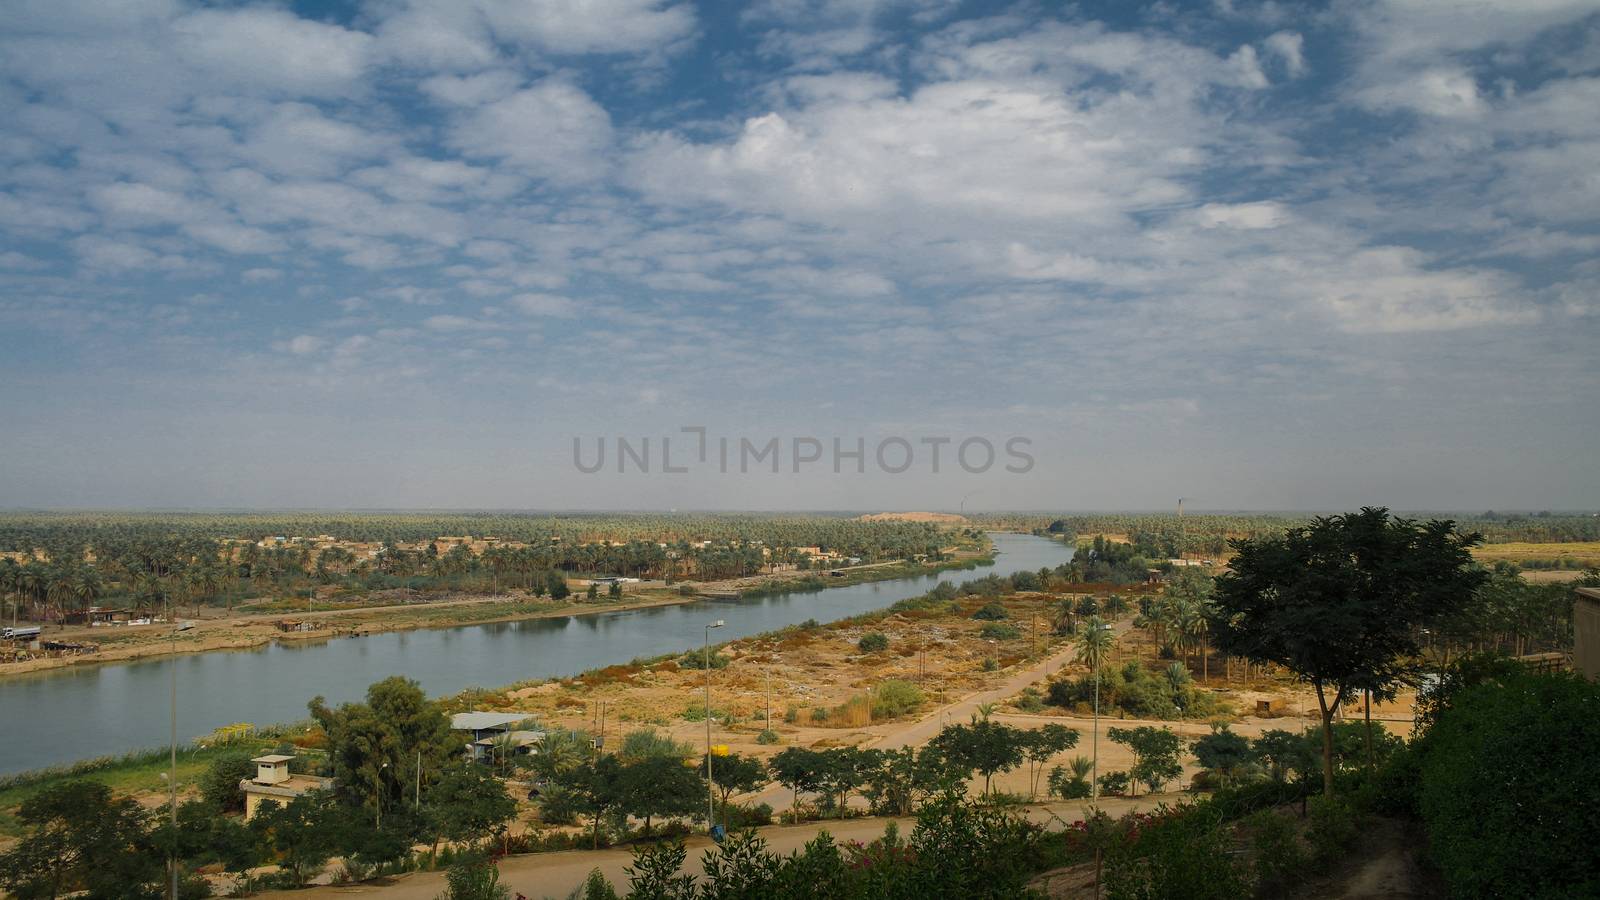 View Euphrates river from former Hussein palace, Hillah, Babyl Iraq by homocosmicos